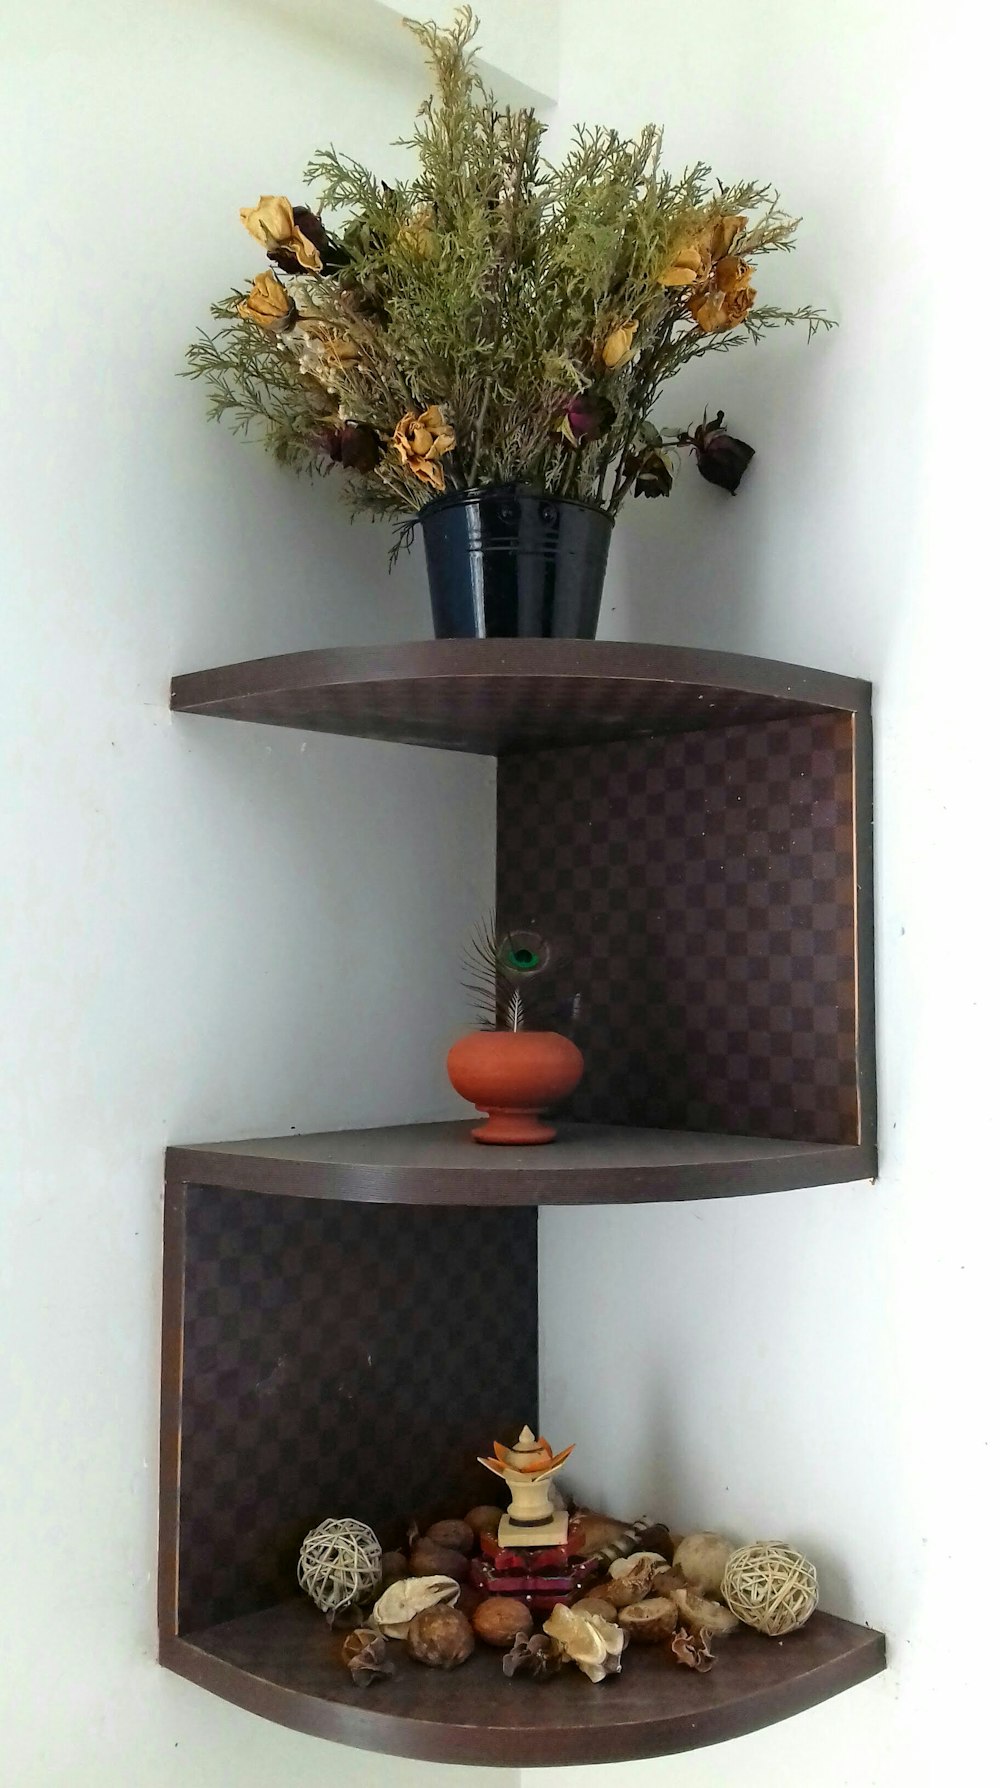 brown wooden shelf and green-leafed plant